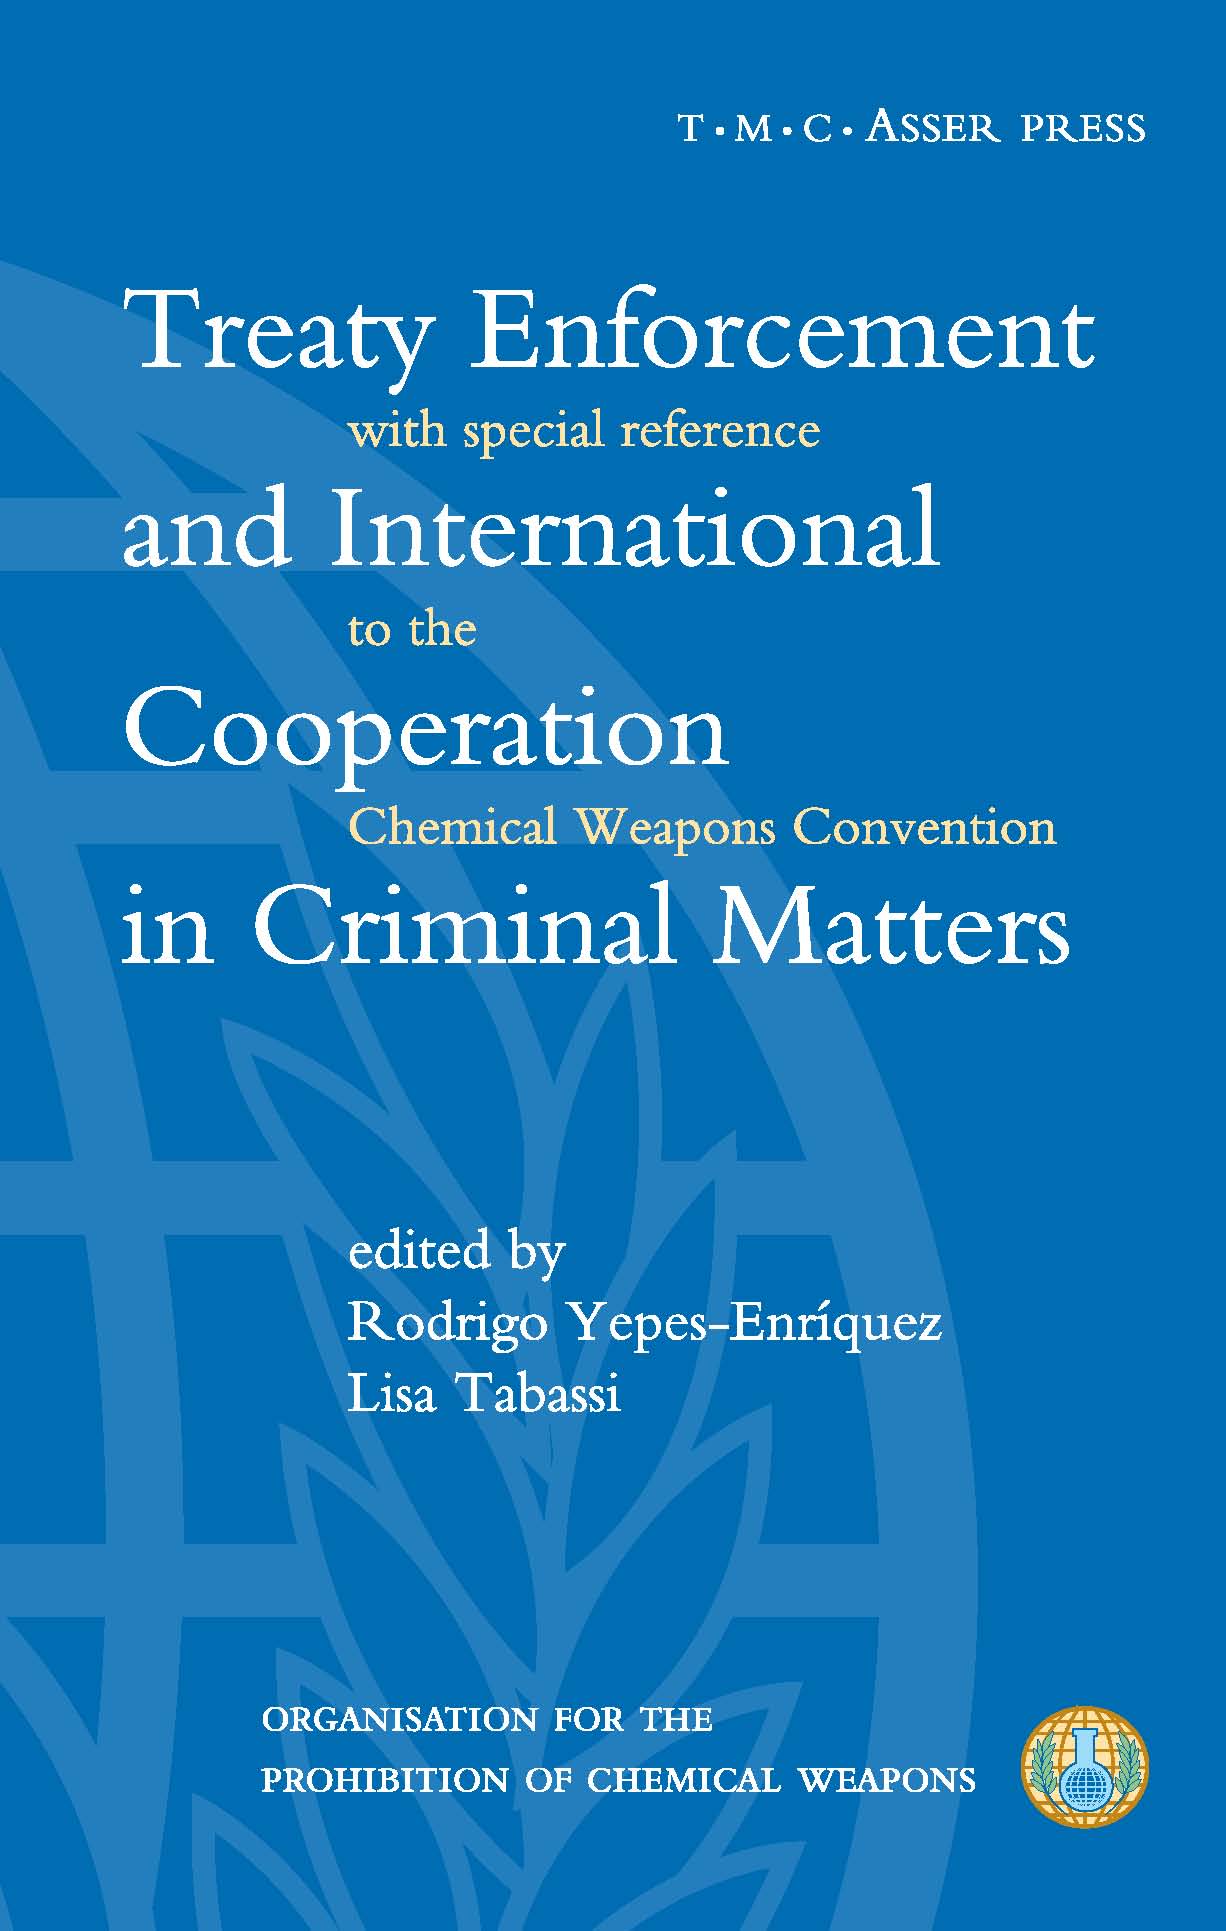 Treaty Enforcement and International Cooperation in Criminal Matters - With Special Reference to the Chemical Weapons Convention